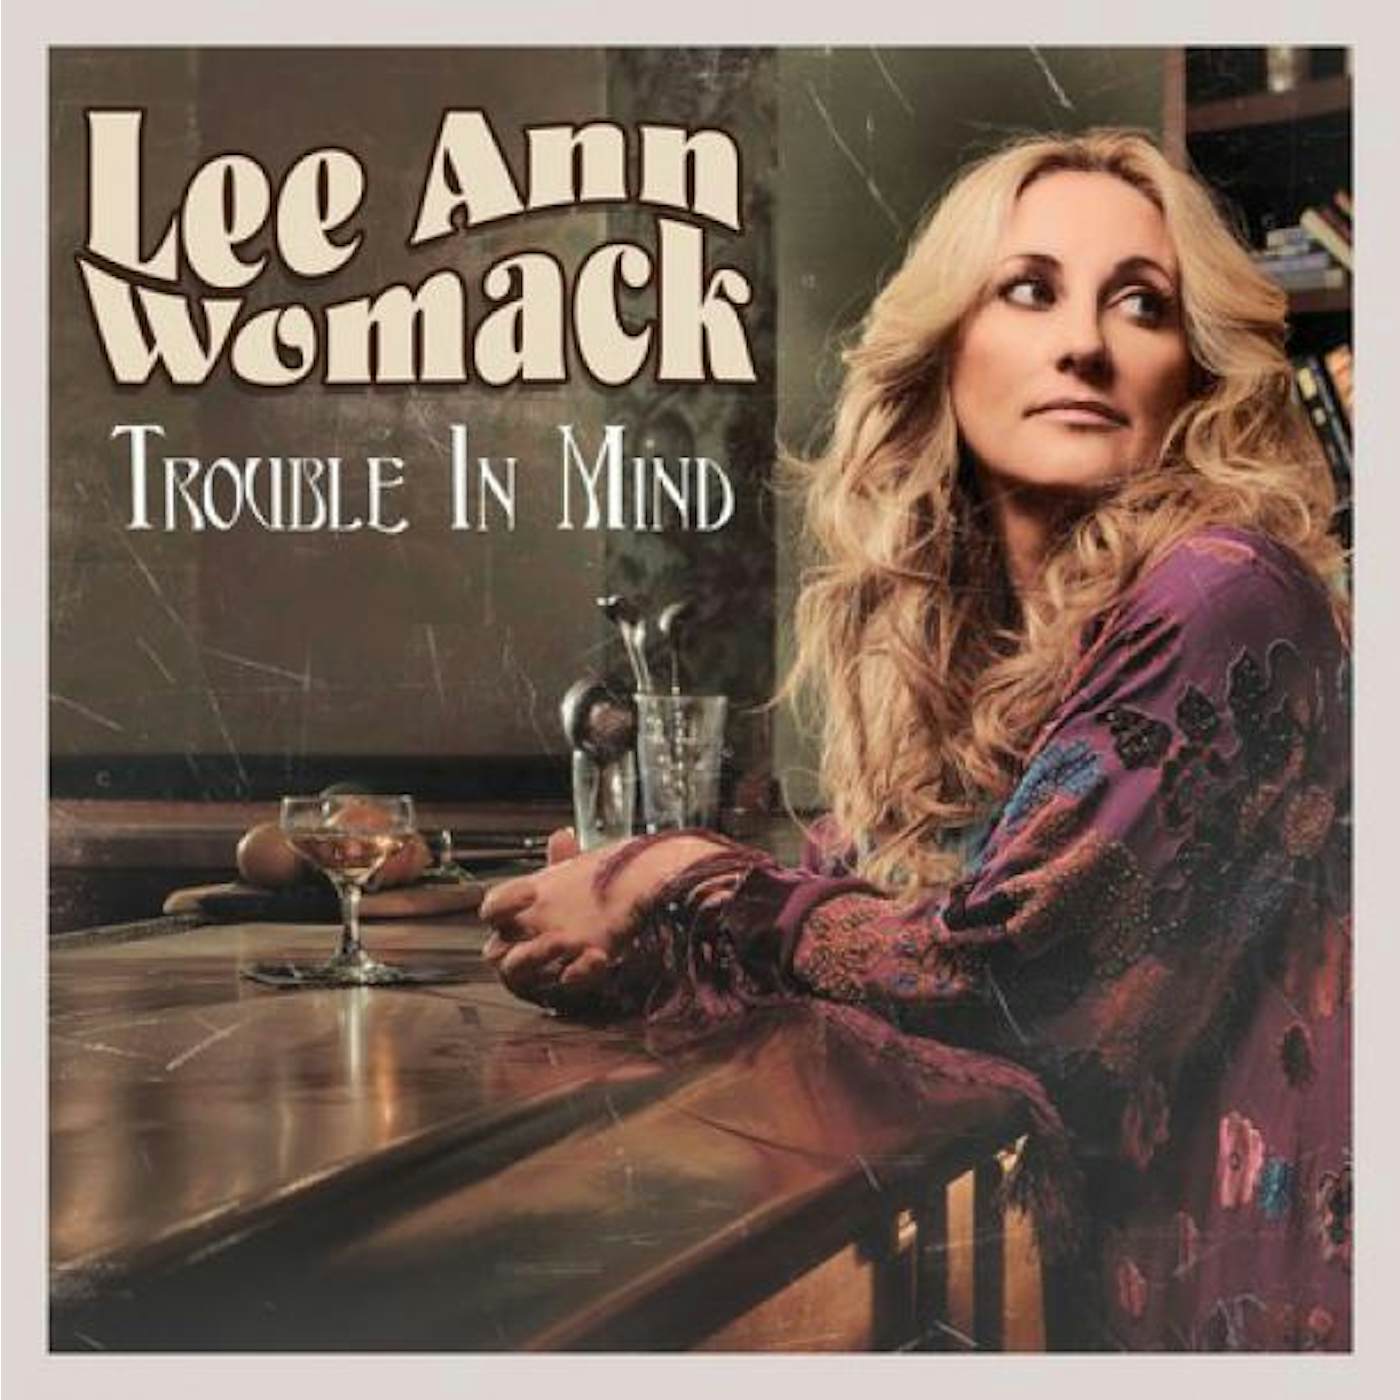 Lee Ann Womack Trouble In Mind Vinyl Record